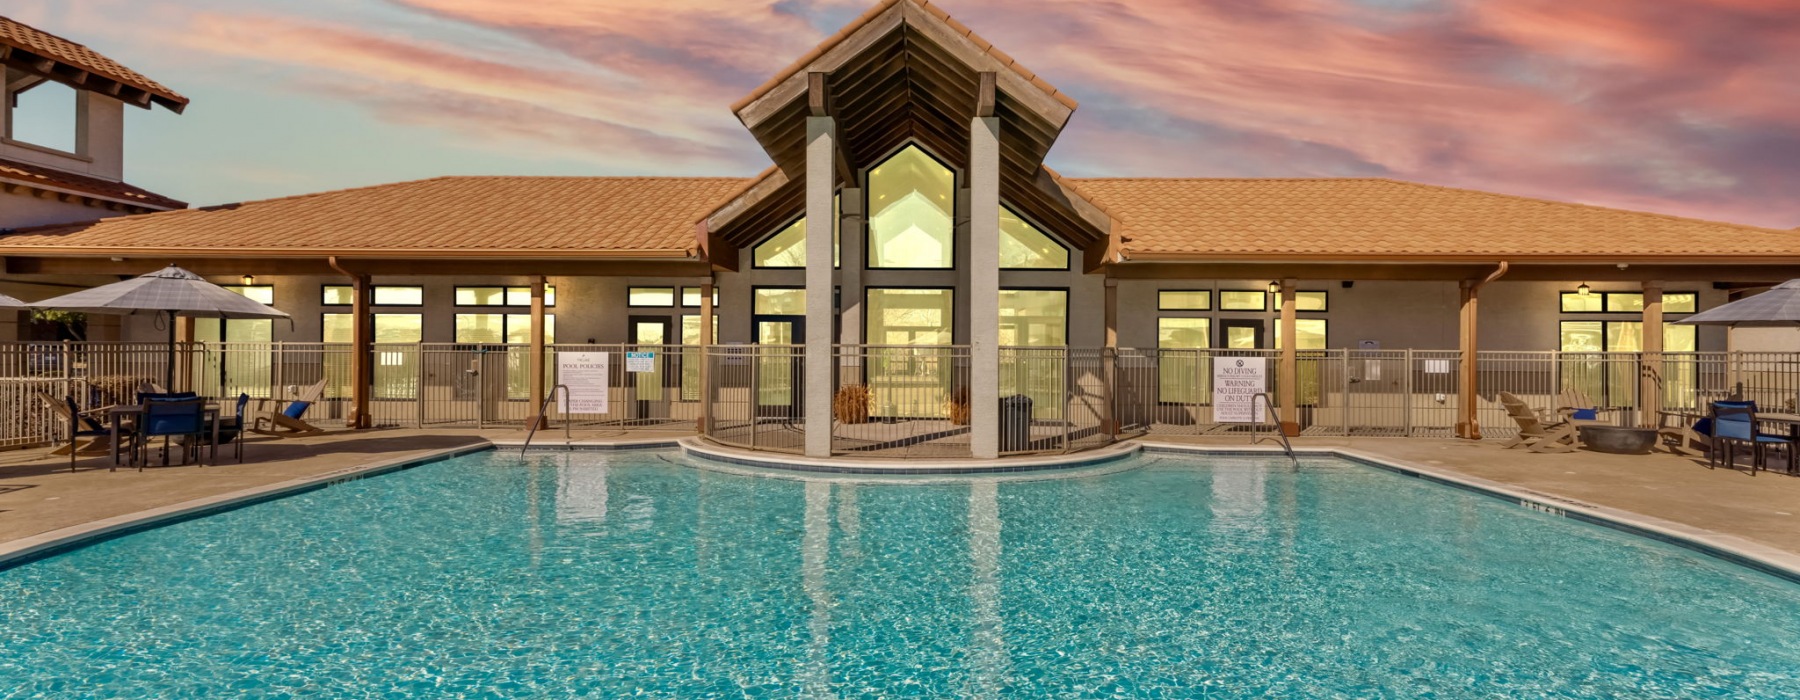 Pool and Clubhouse at Carraige Homes on the Lake